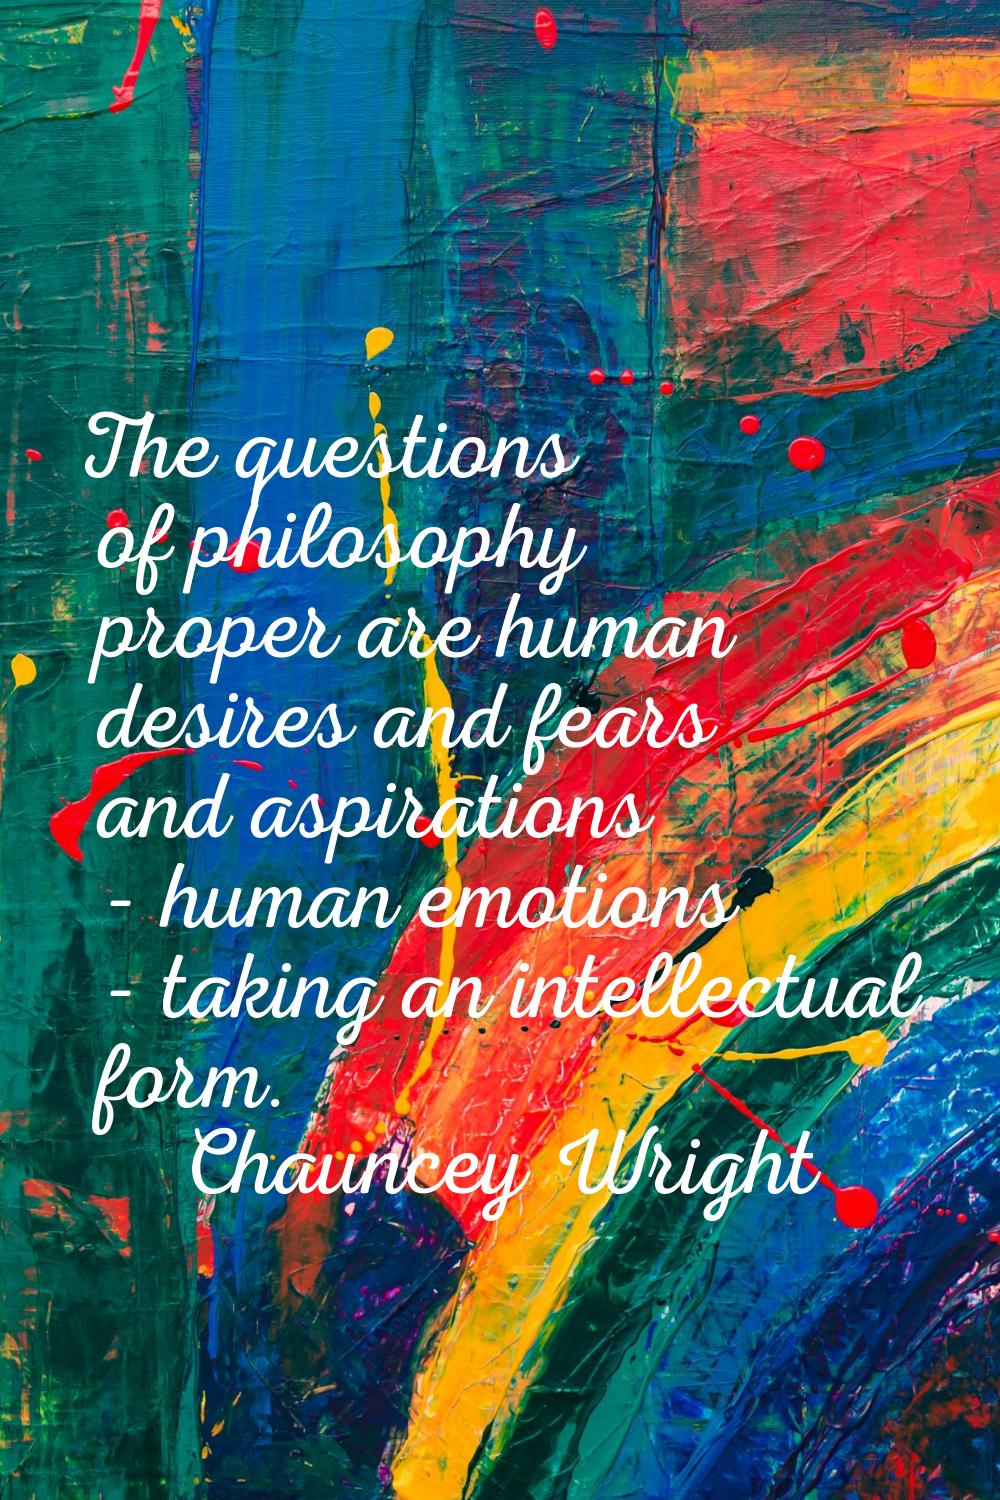 The questions of philosophy proper are human desires and fears and aspirations - human emotions - t